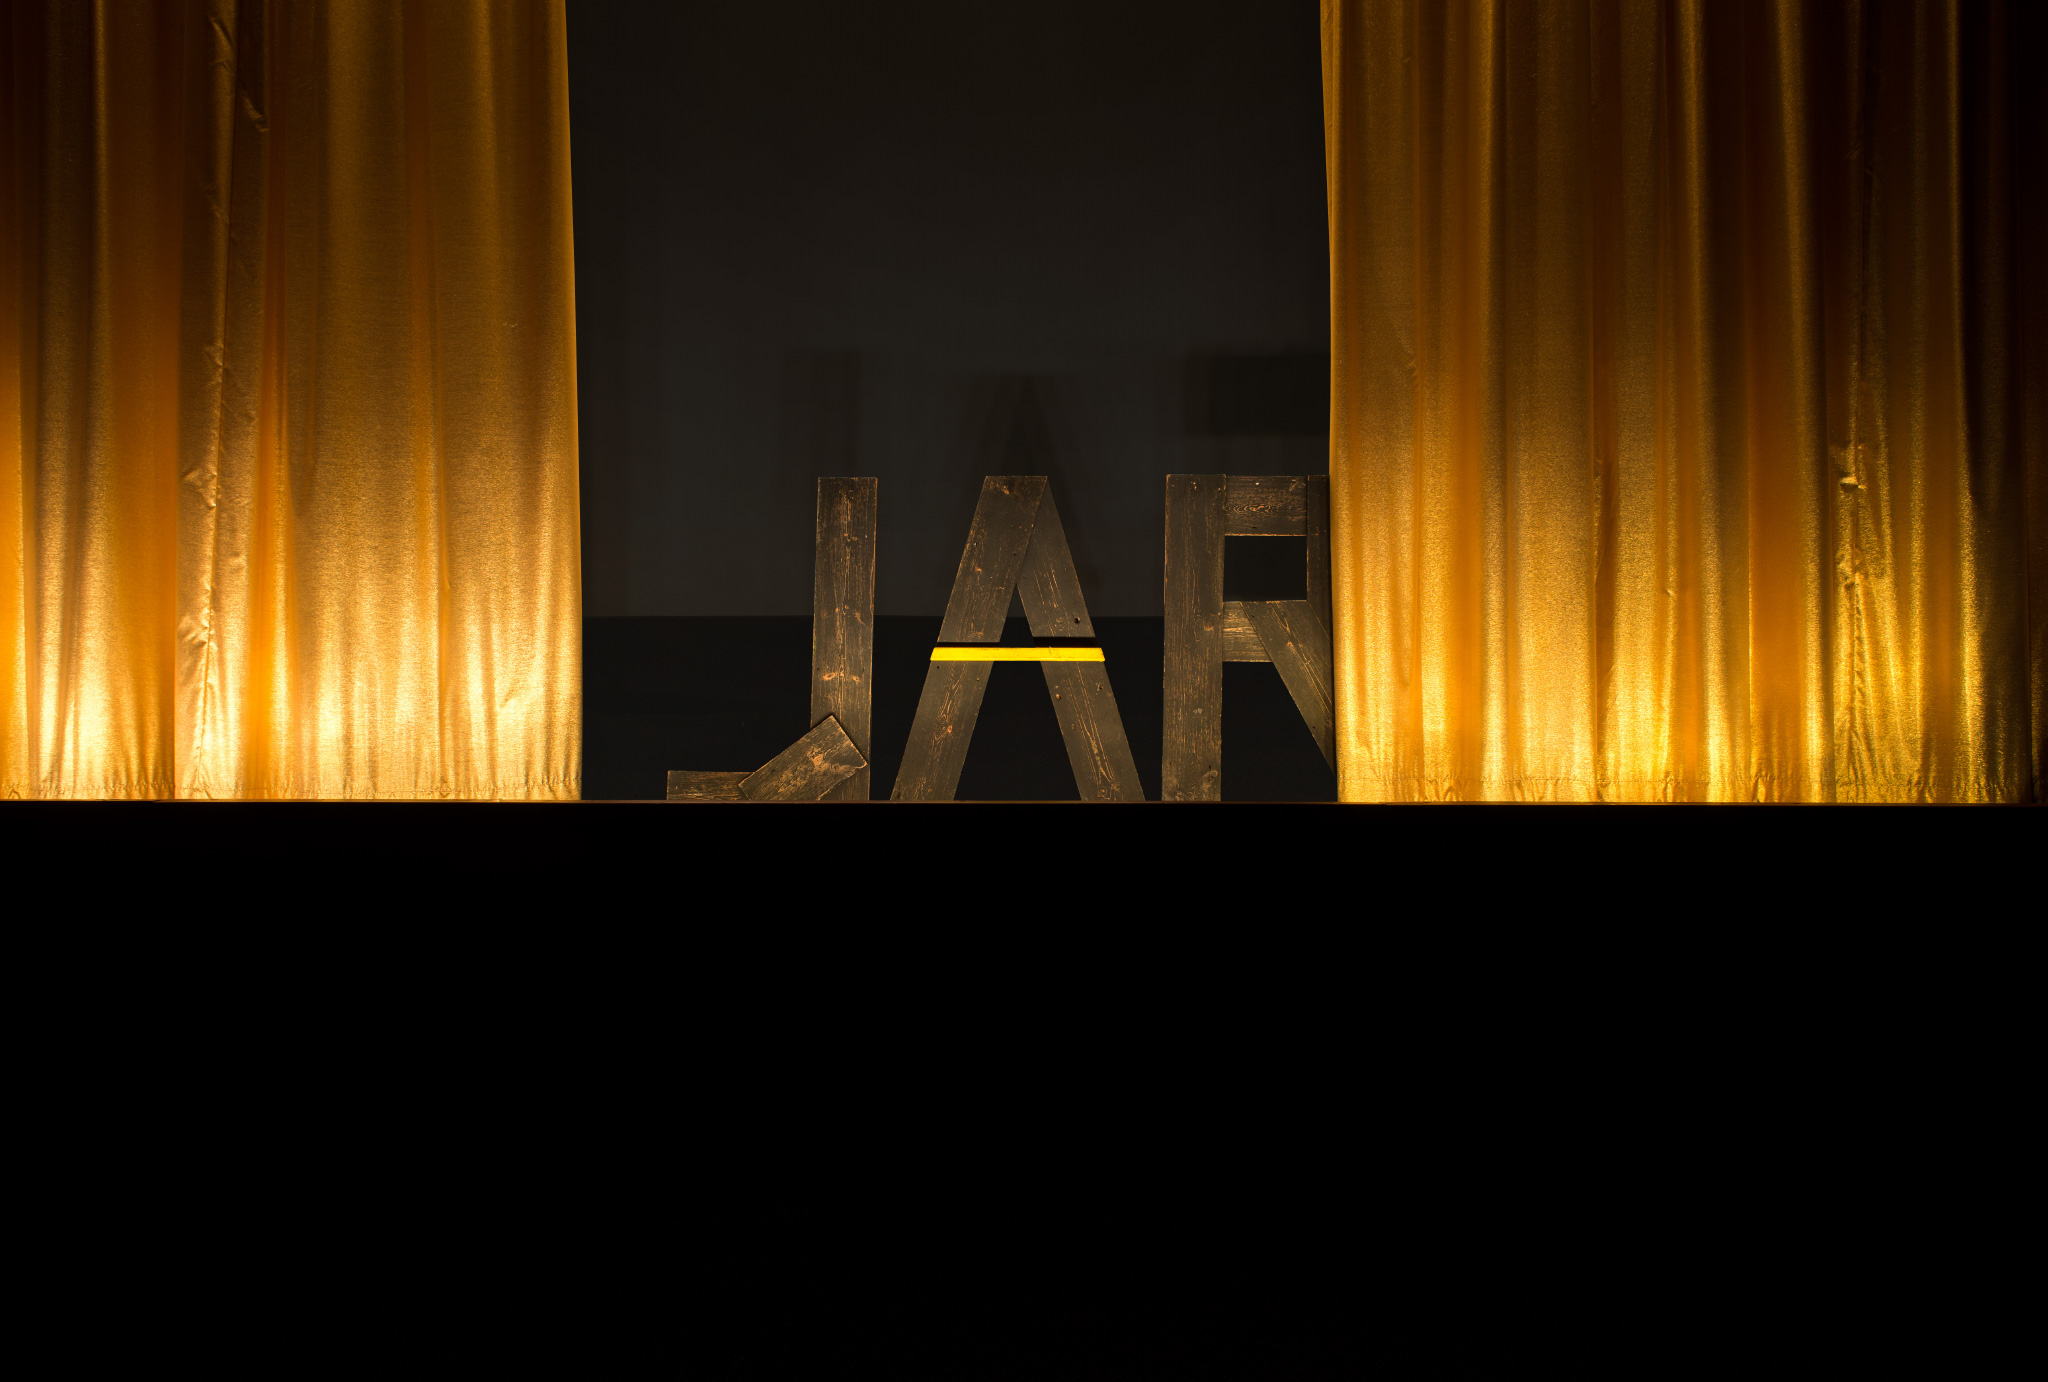 letters ‘JAR’ made out of wood standing in the back between two golden curtain